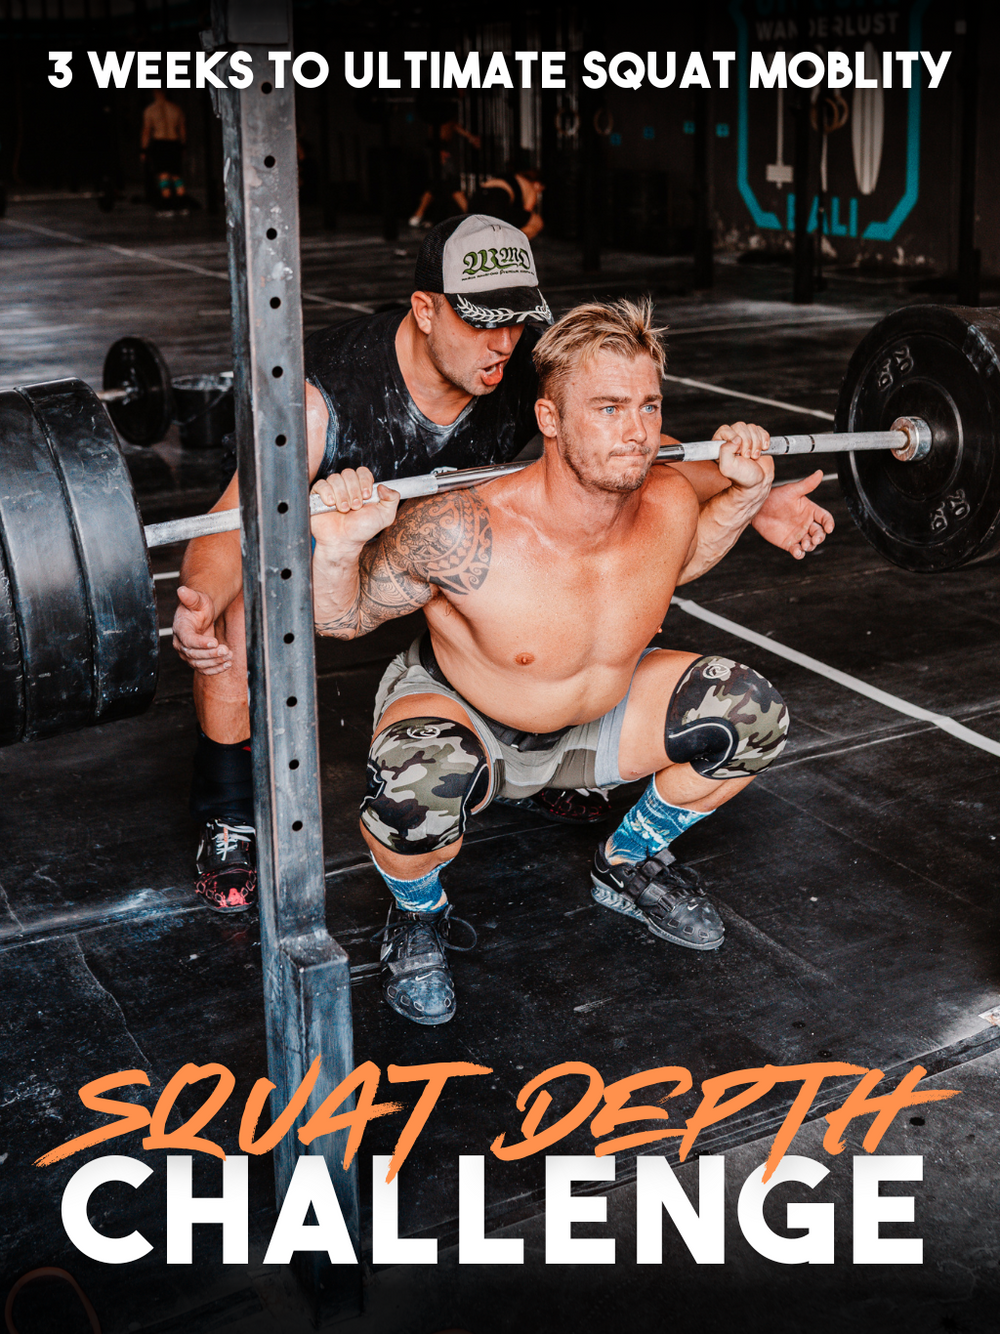 21-Day Squat Depth Mobility Challenge